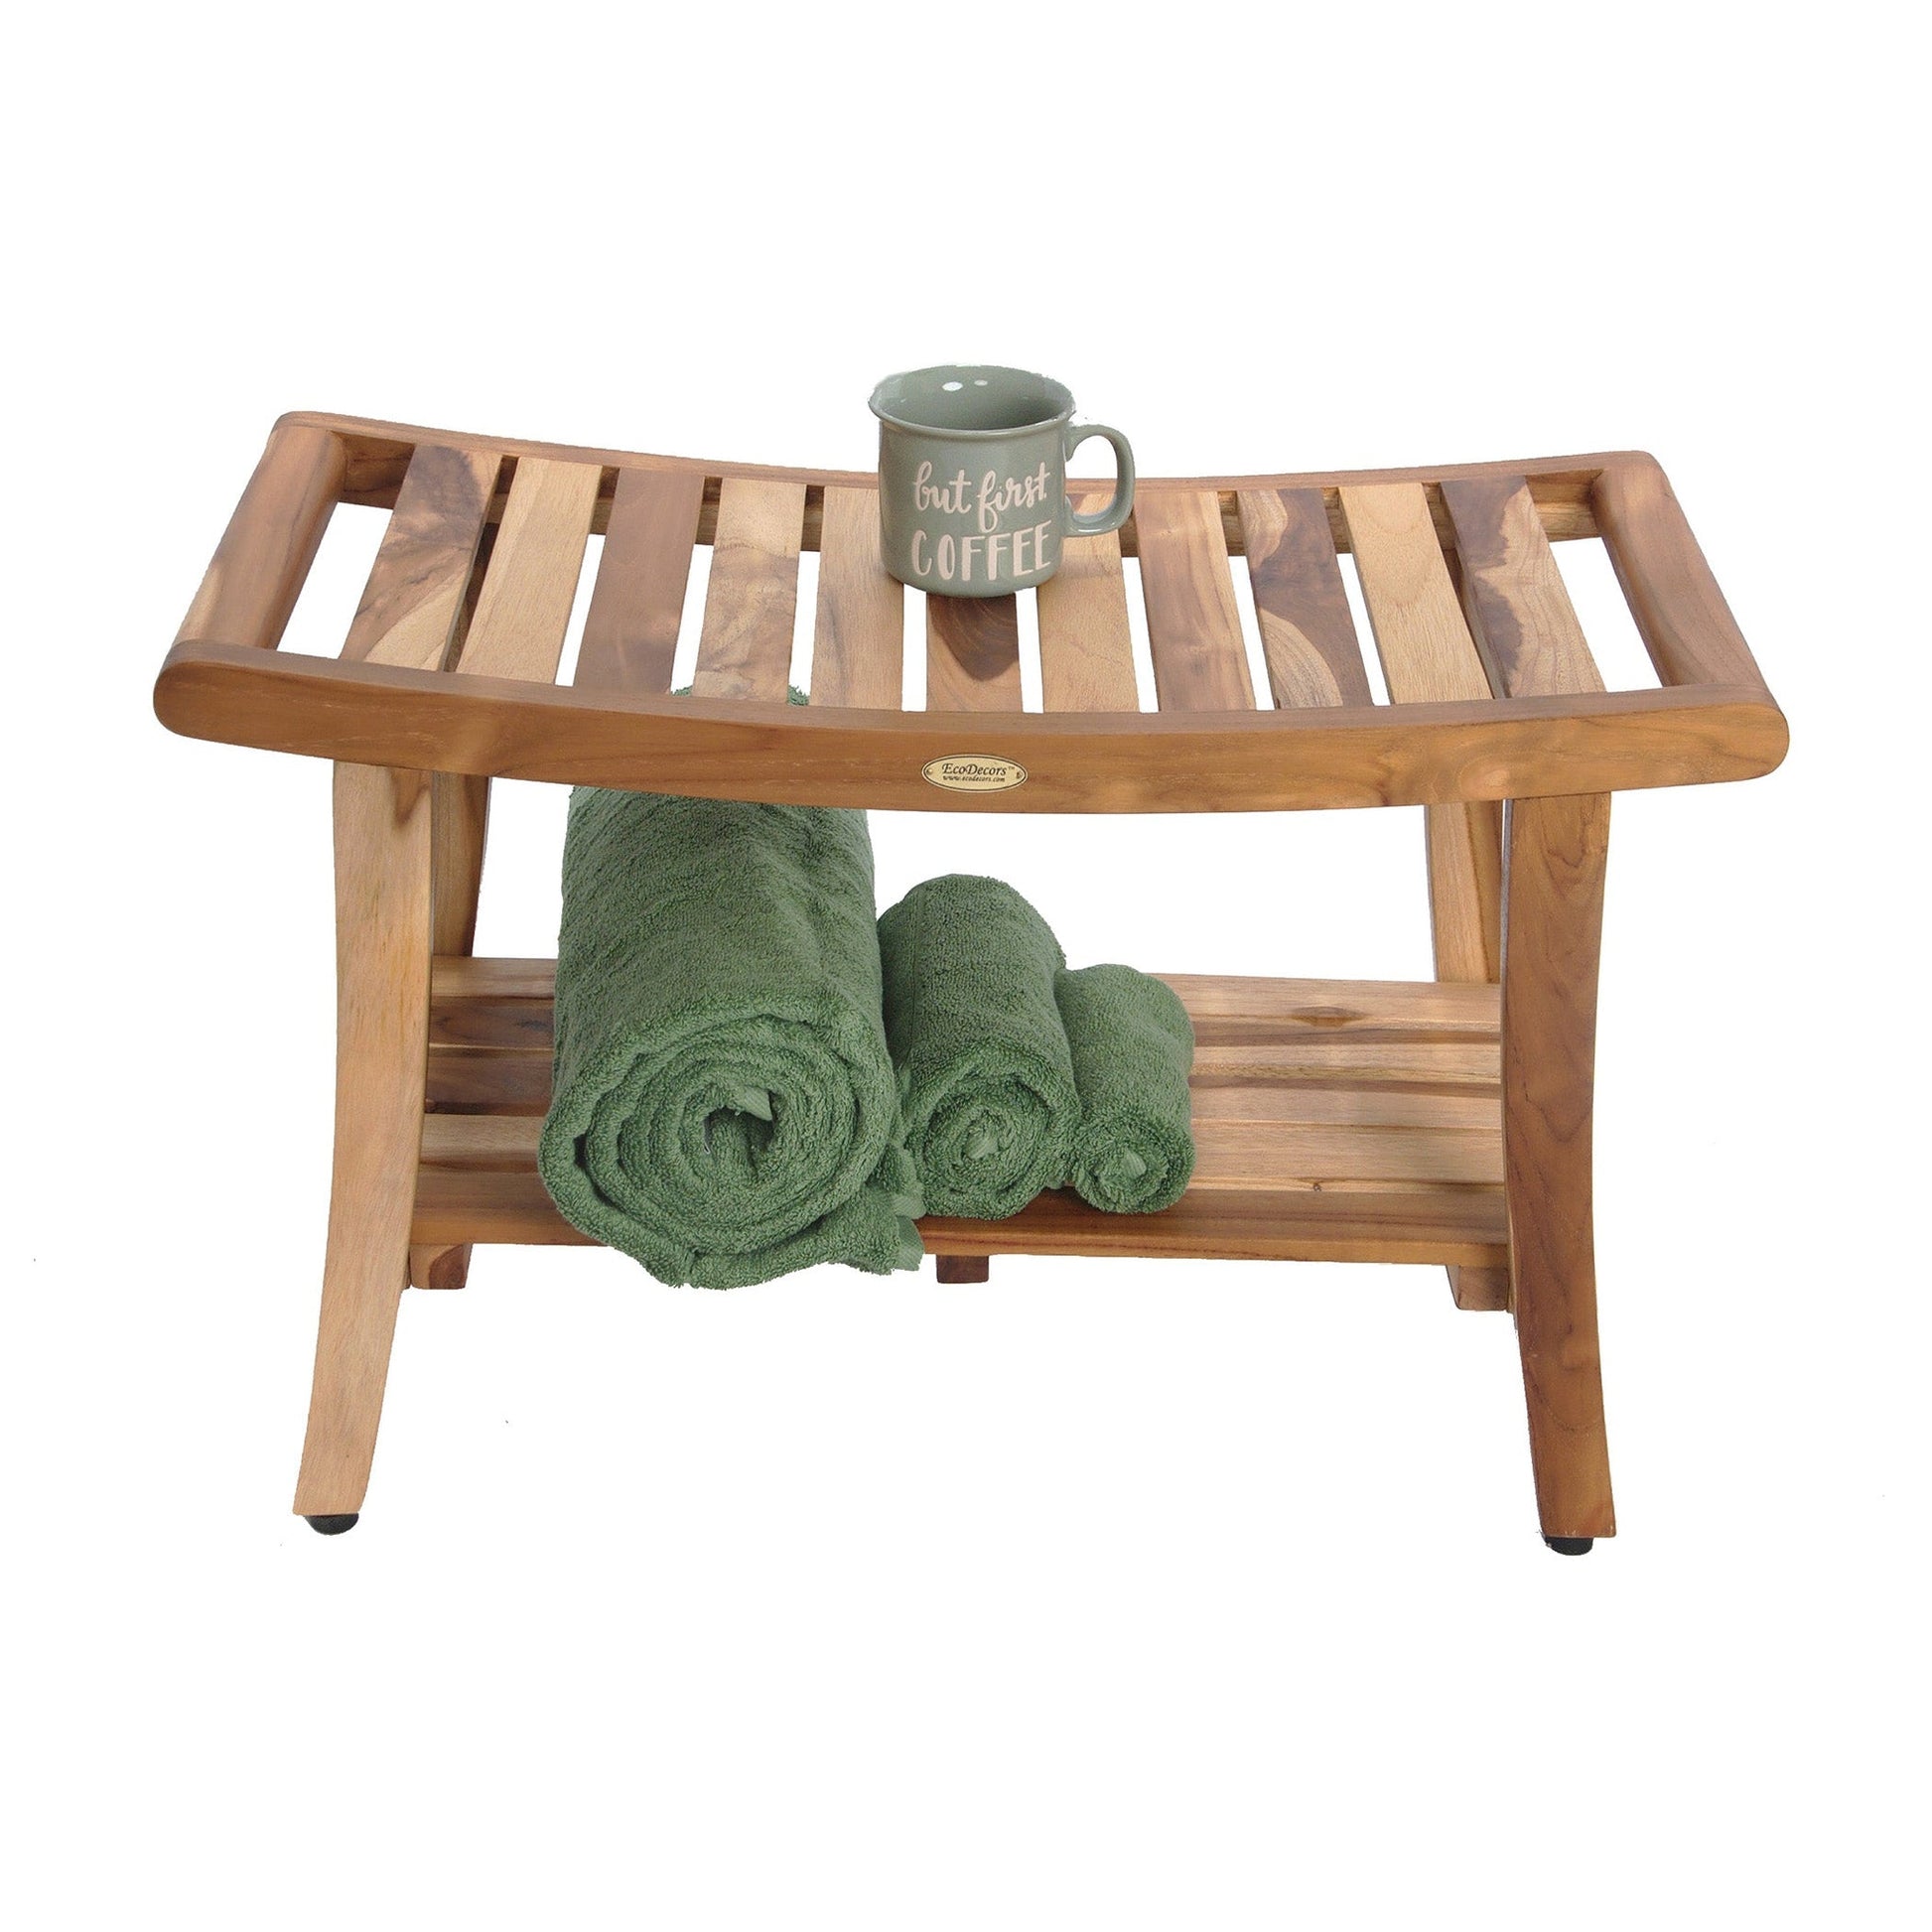 EcoDecors Harmony 30" EarthyTeak Solid Teak Wood Shower Bench With Shelf and LiftAide Arms